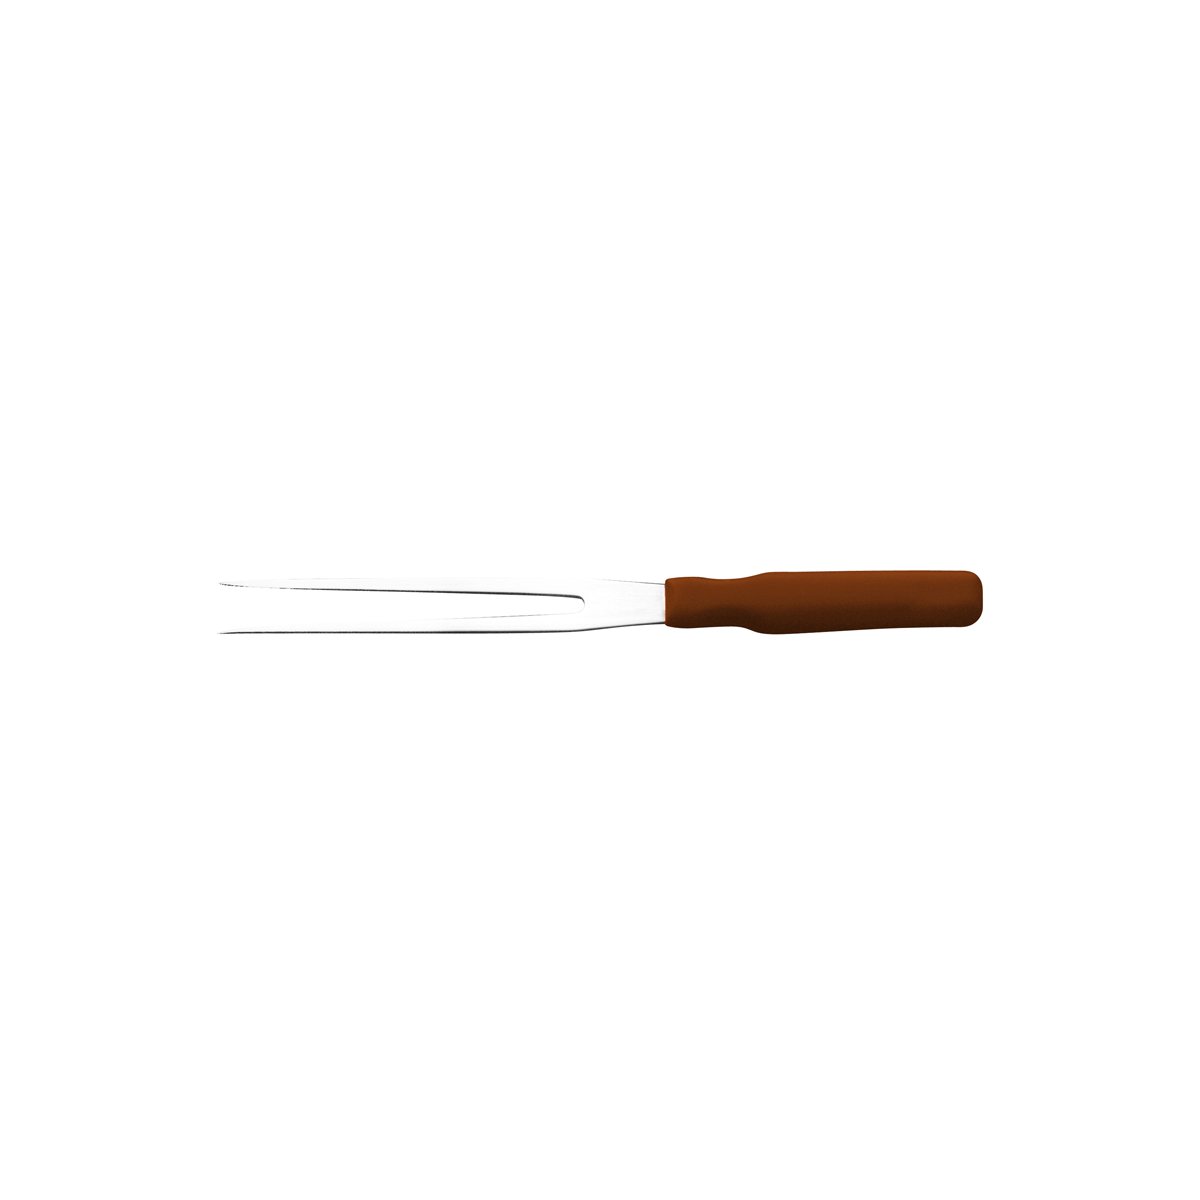 25431 Ivo Professional 55000 Carving Fork Brown 180mm Tomkin Australia Hospitality Supplies